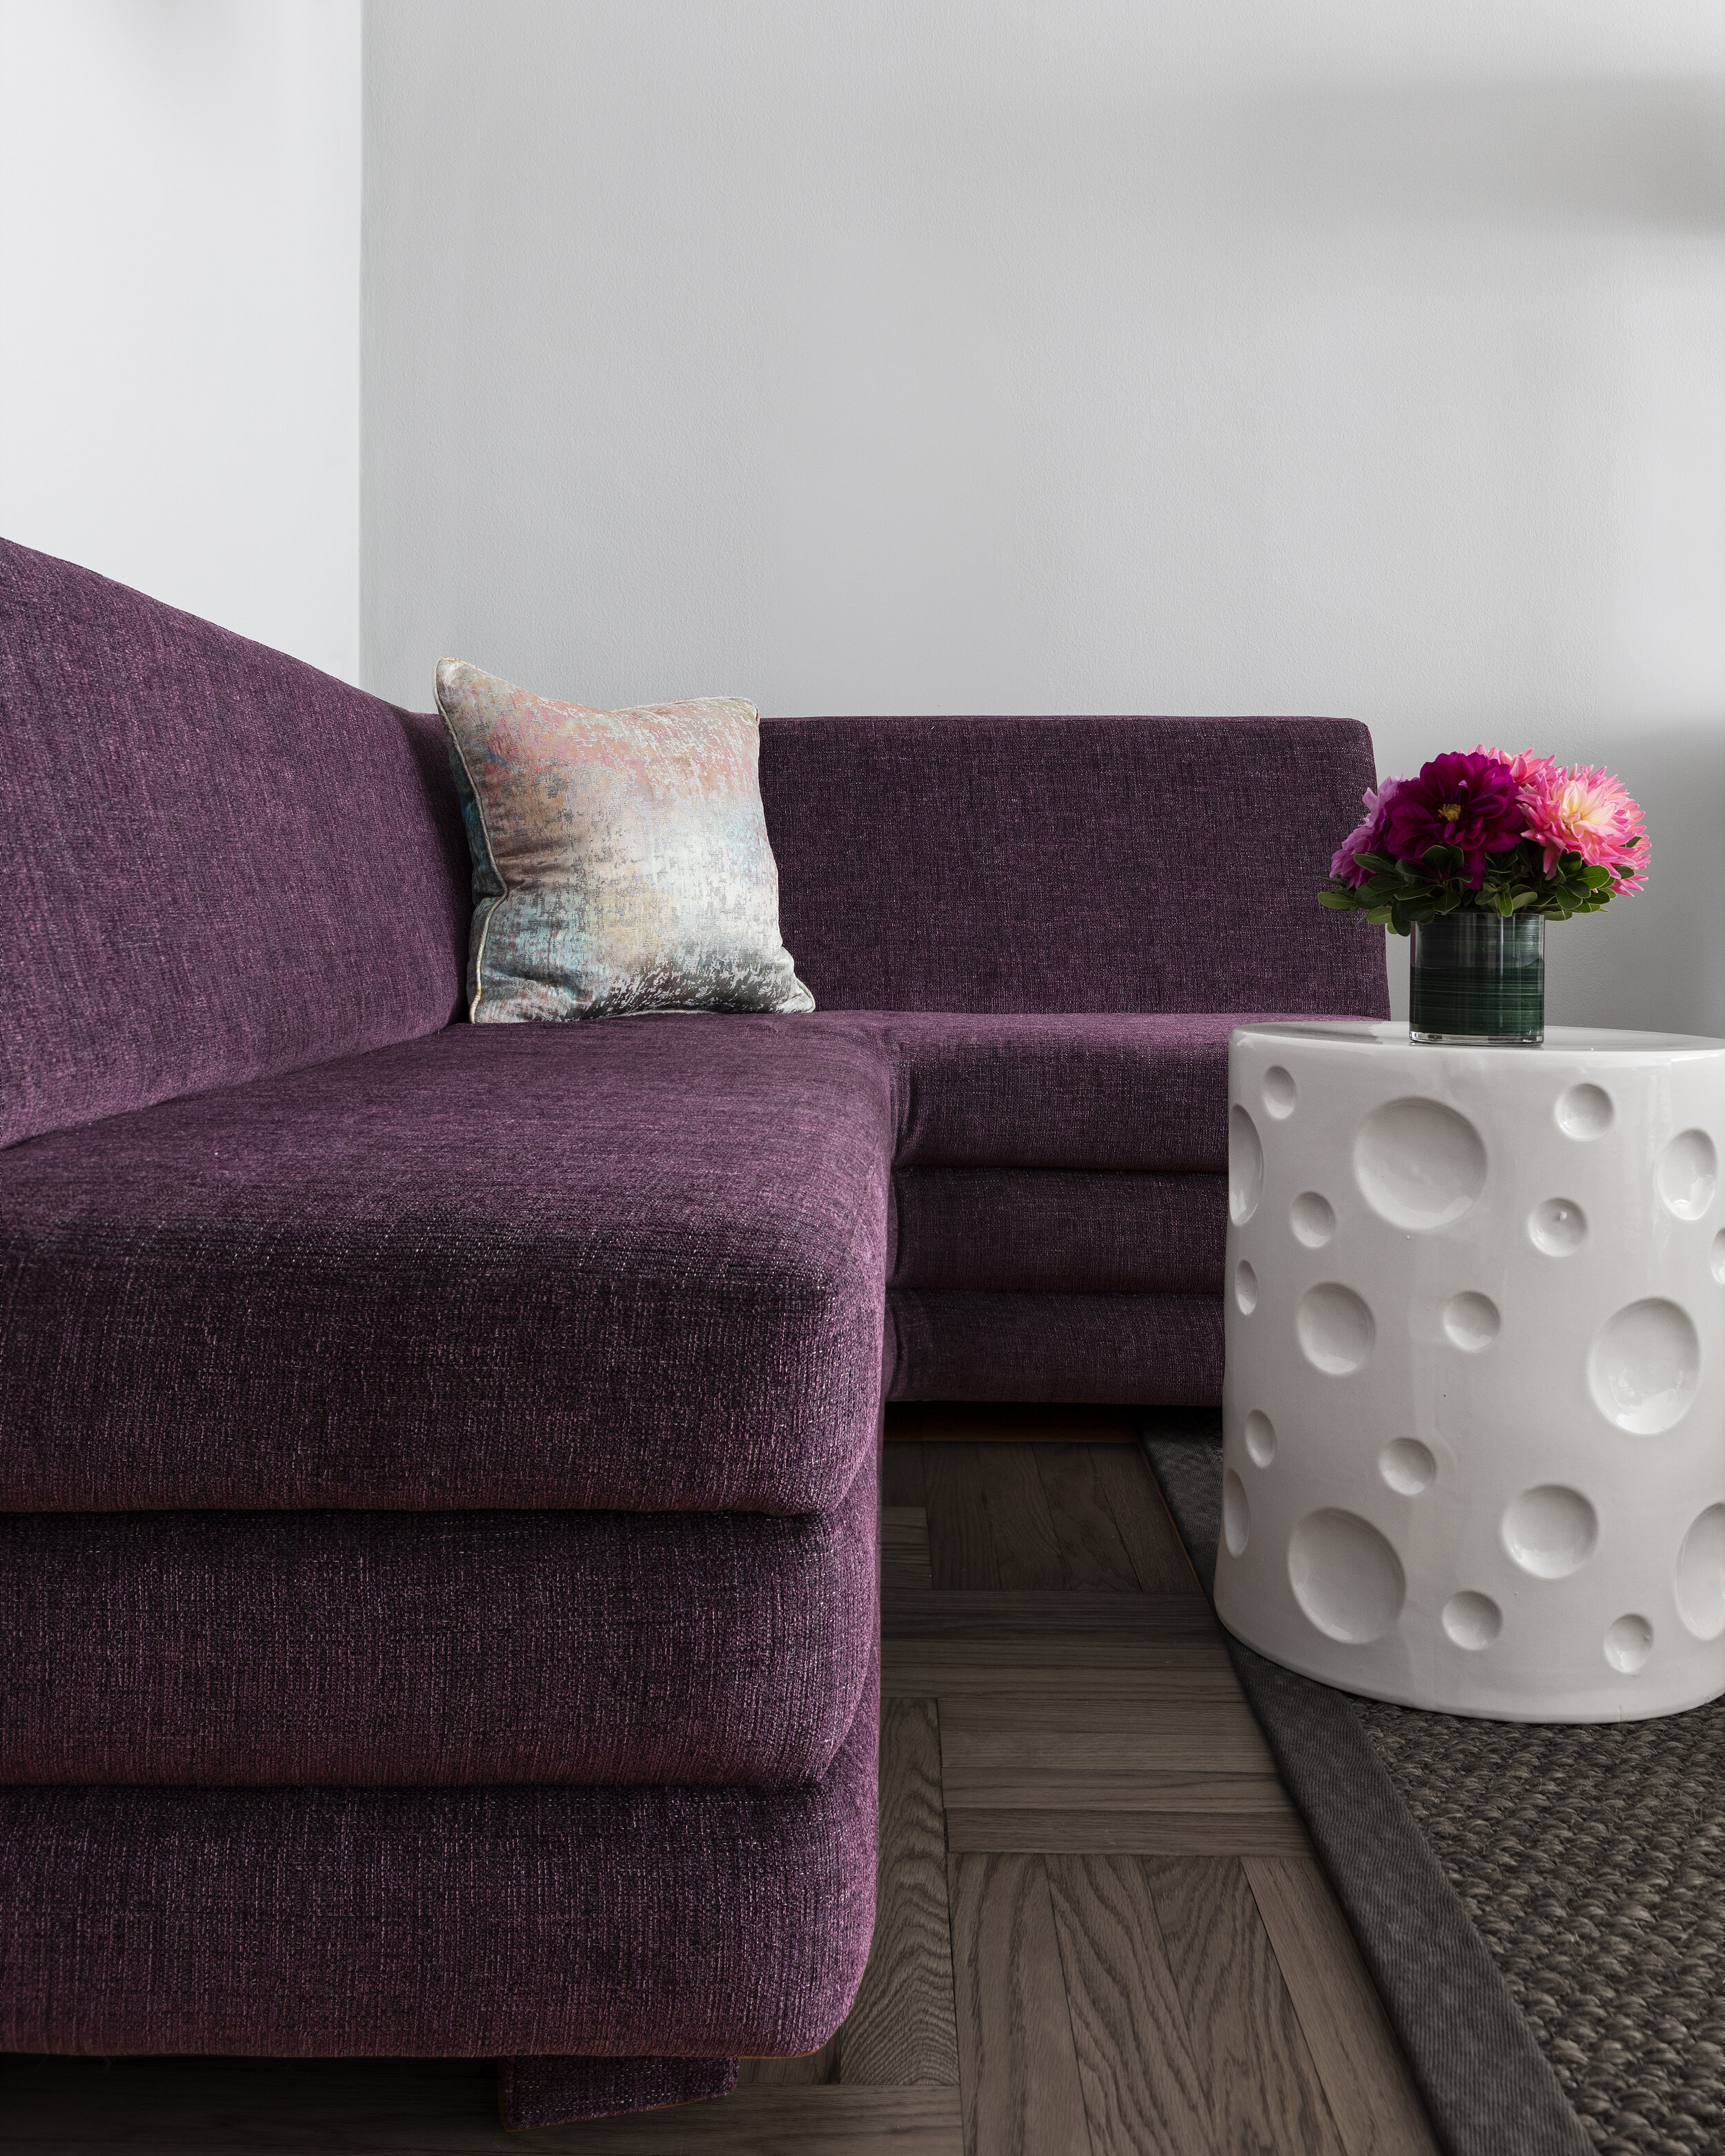 jacqueline-cutler-larchmont-residence-commercial-lobby-LR-living-room-detail-purple-couch.jpg